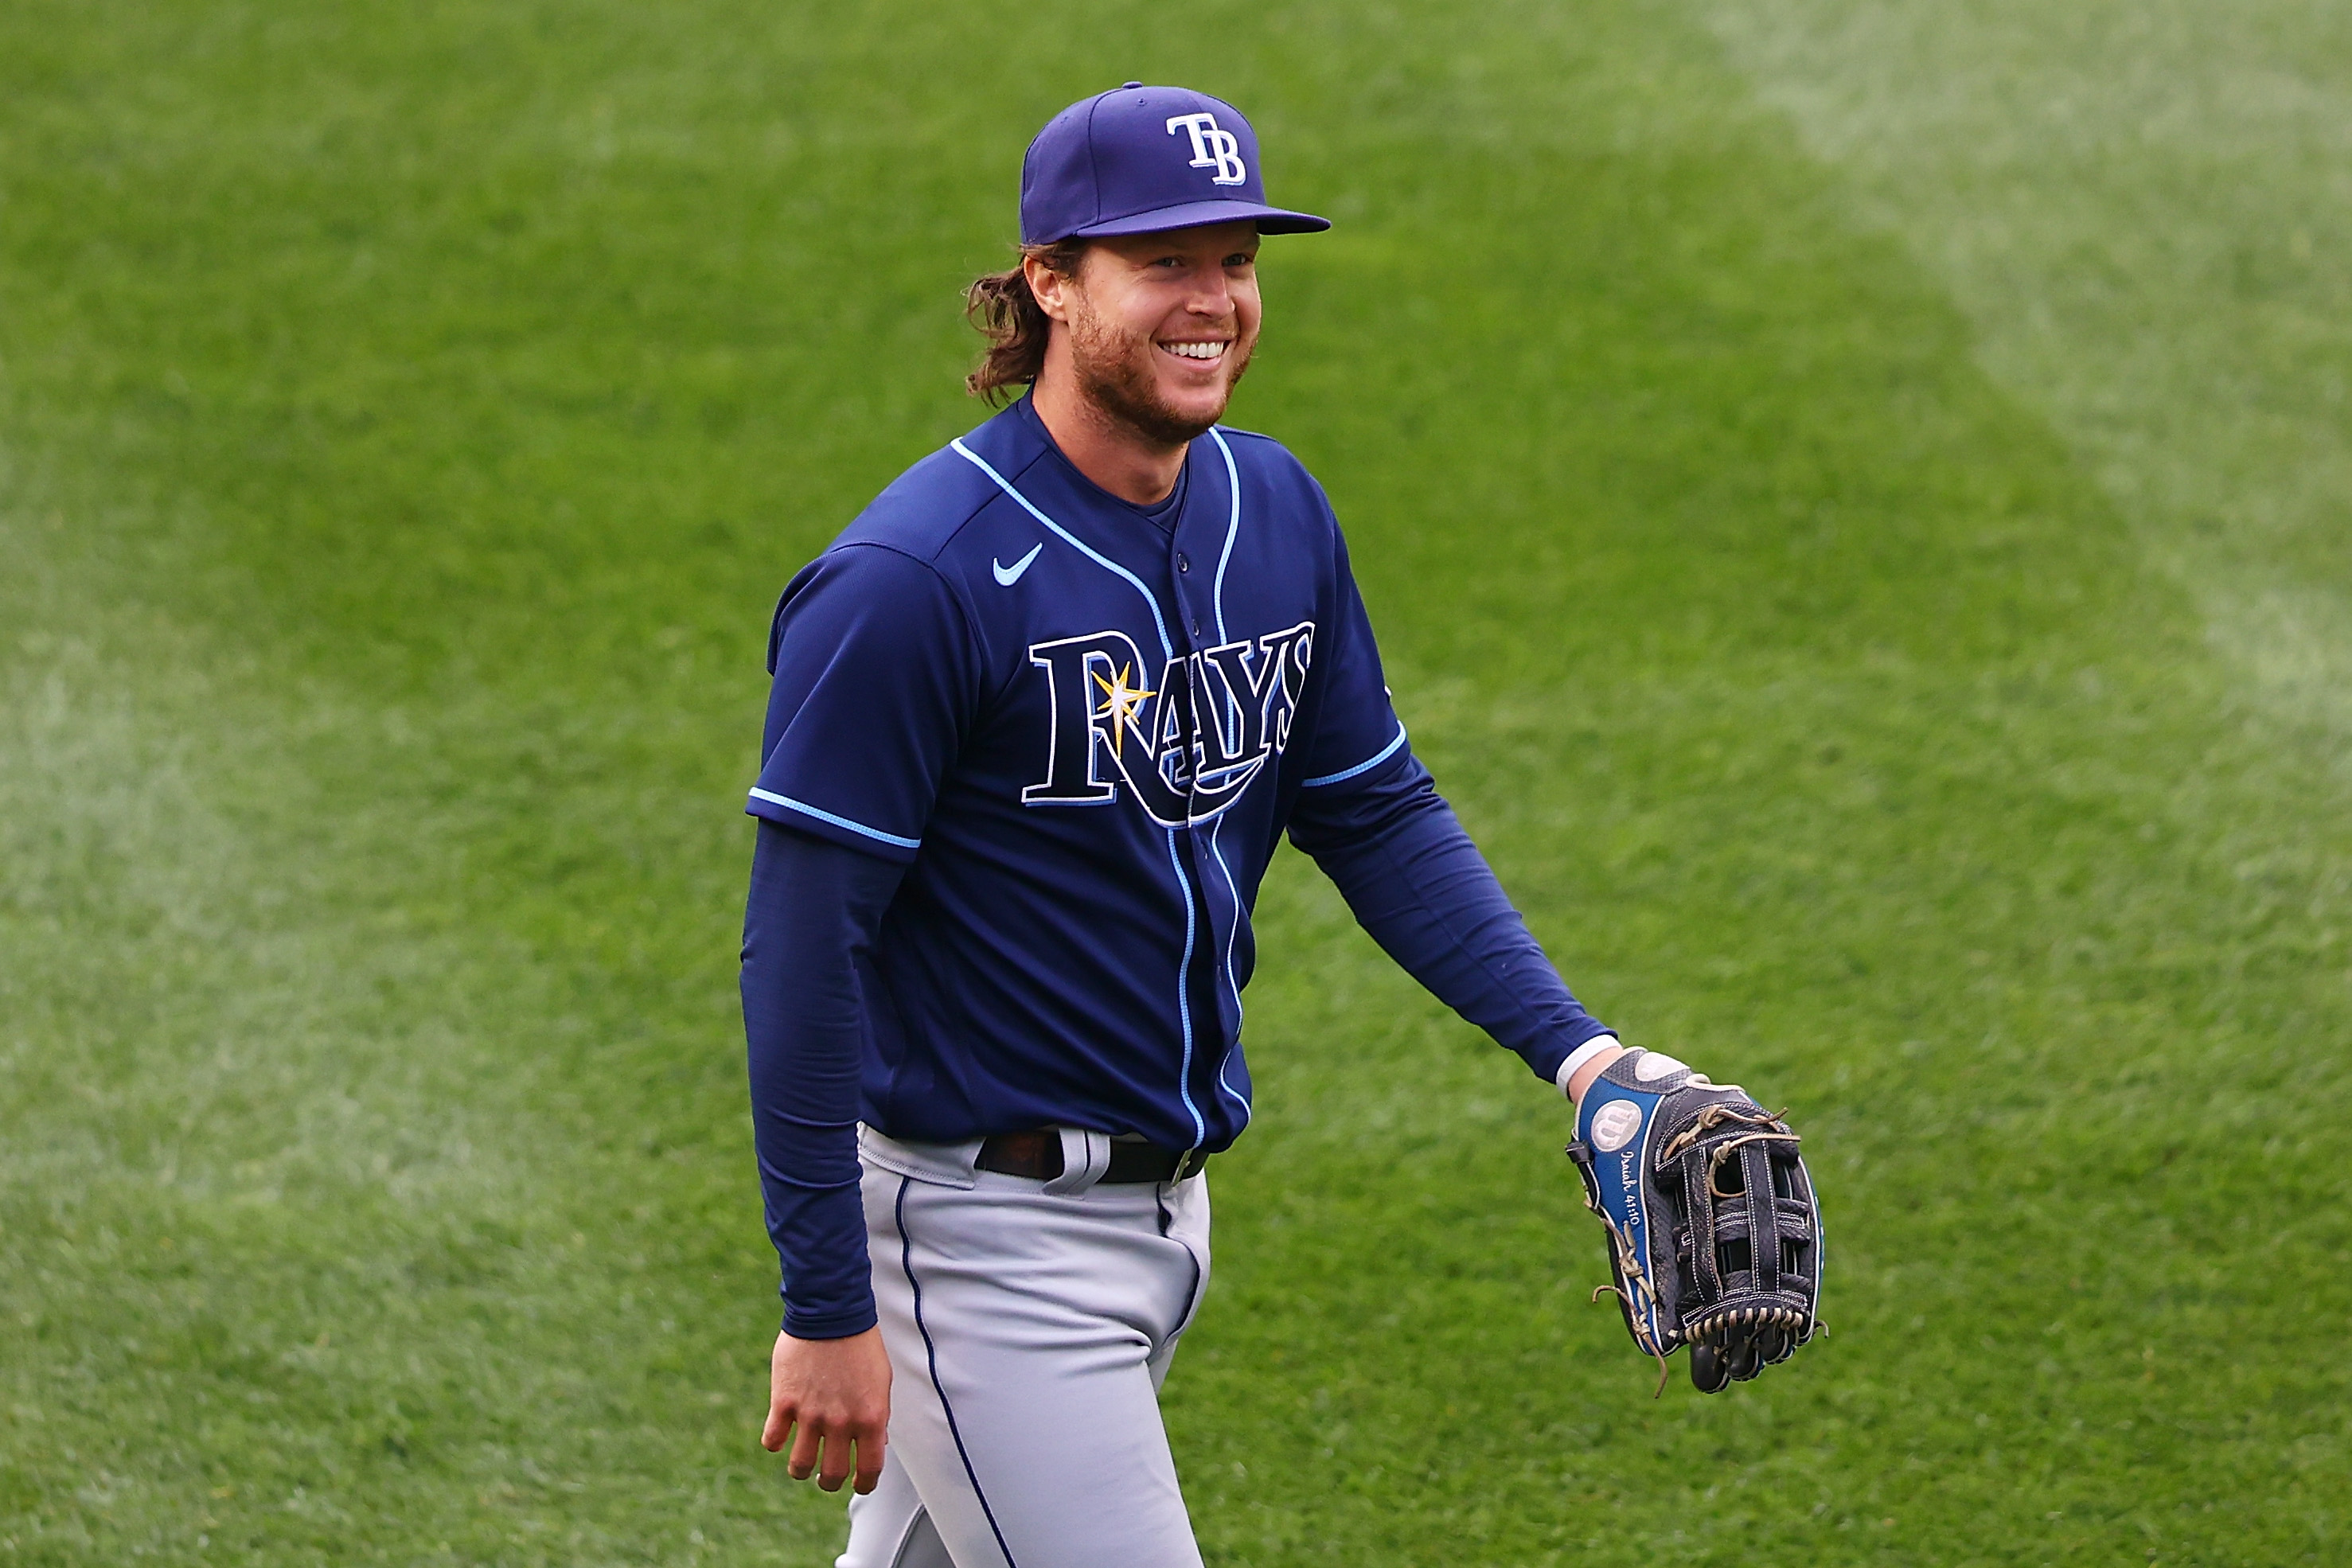 Rays hero Brett Phillips has obscure connections to Yankees, Mets